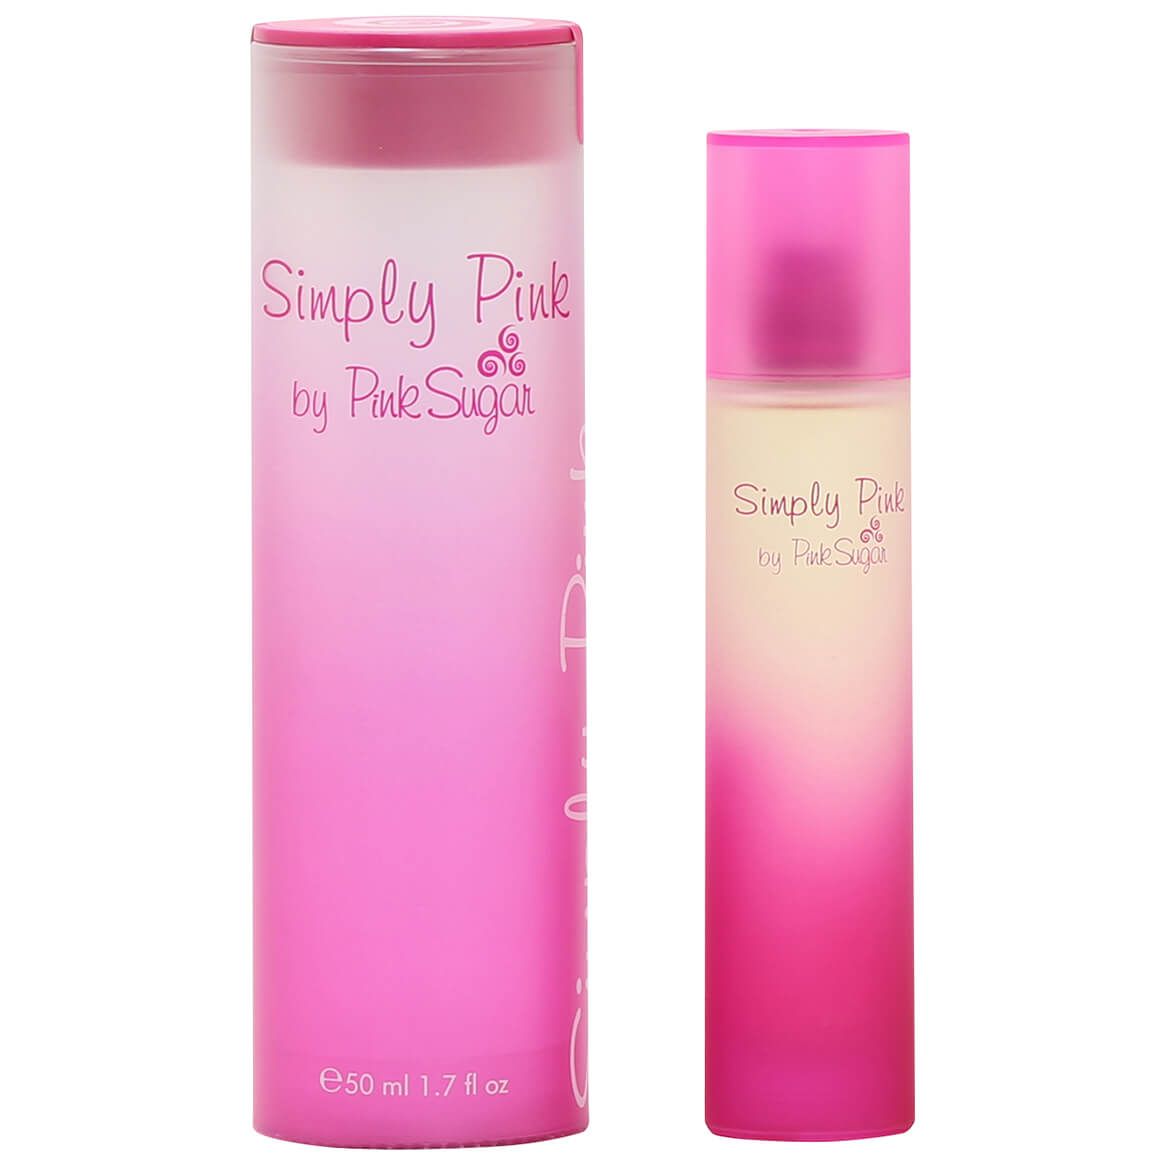 Simply Pink by Aquolina for Women EDT, 1.7 fl. oz. + '-' + 377284